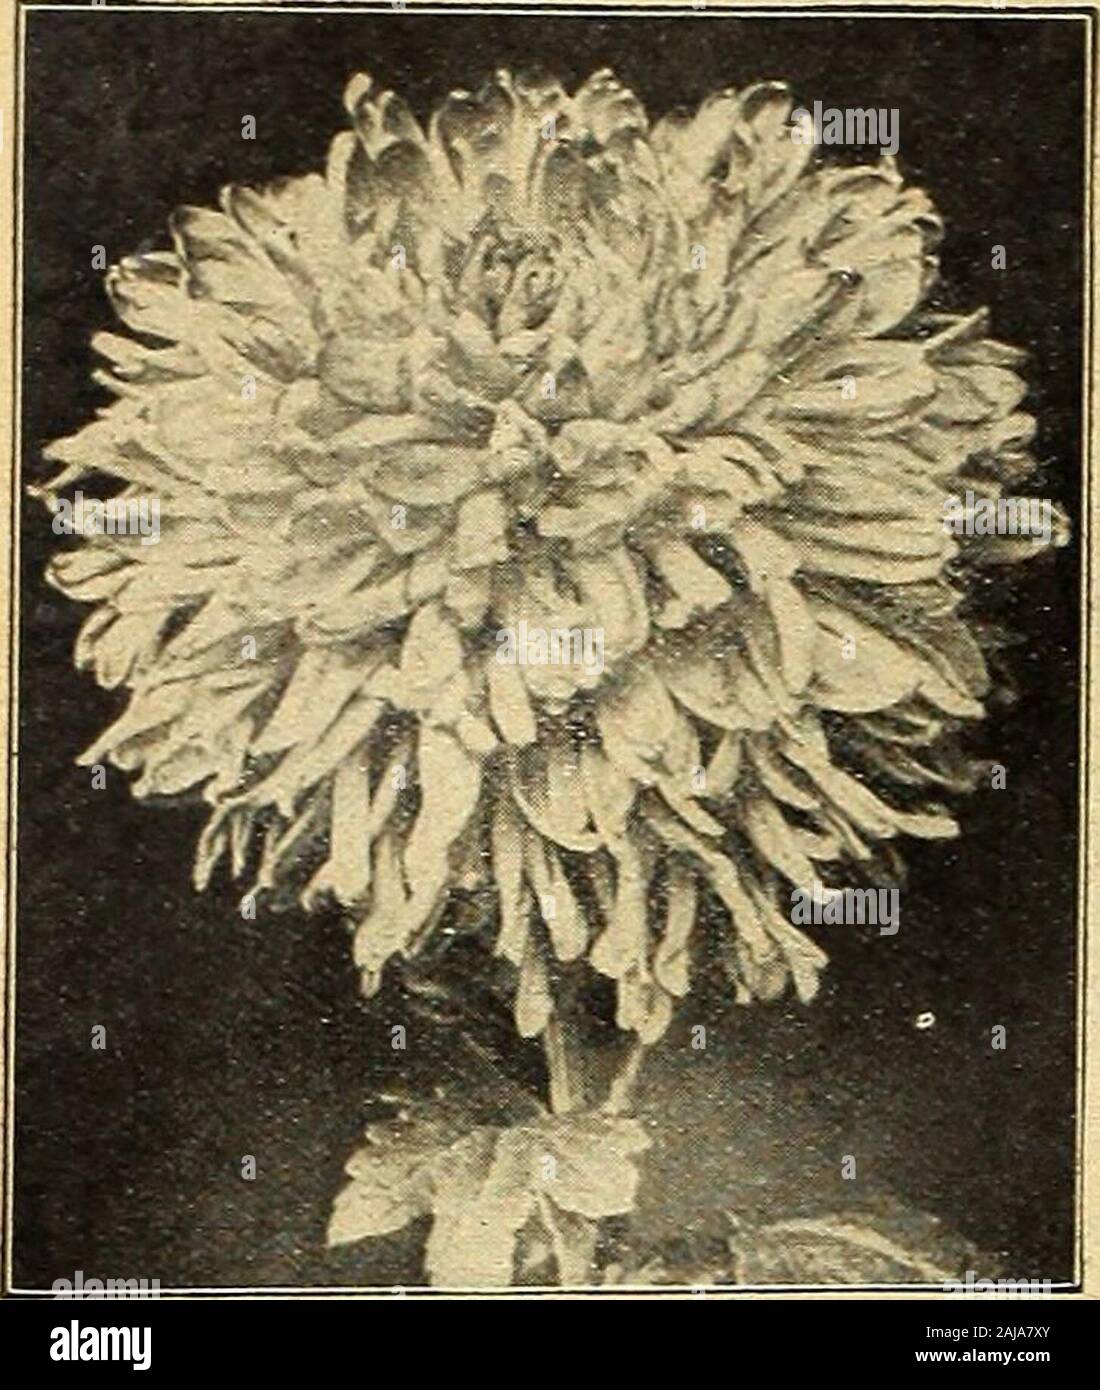 Vaughan's seed store . nd Drooping Spikes, (b) Caladium Esculentum. (b) Centaurea Gymnocarpa. (a) and (b) Pennisetum Longistylum. ROUND BED, 7 ft. across, 19 plants. 1 Yellow Humbert. (For center.)6 King Humbert. (Middle row.)12 Firebird. (Outside row.)C17 Above 19 plants, ppaid.. .$3.50C18 Above, Extra size, ppaid.. 4.00 19 Bronze, solid bed, 1st size, prepaid $2.00 19 Yellow, solid bed, 1st size, prepaid 2-00 19 Pink, solid bed, 1st size, prepaid • ? 2-00 19 Scarlet, solid bed, 1st size, prepaid 2-00 (If not prepaid, deduct 25c on first size, 50c on Extra size.) BED No. 5 1 Florence Vaughan. Stock Photo